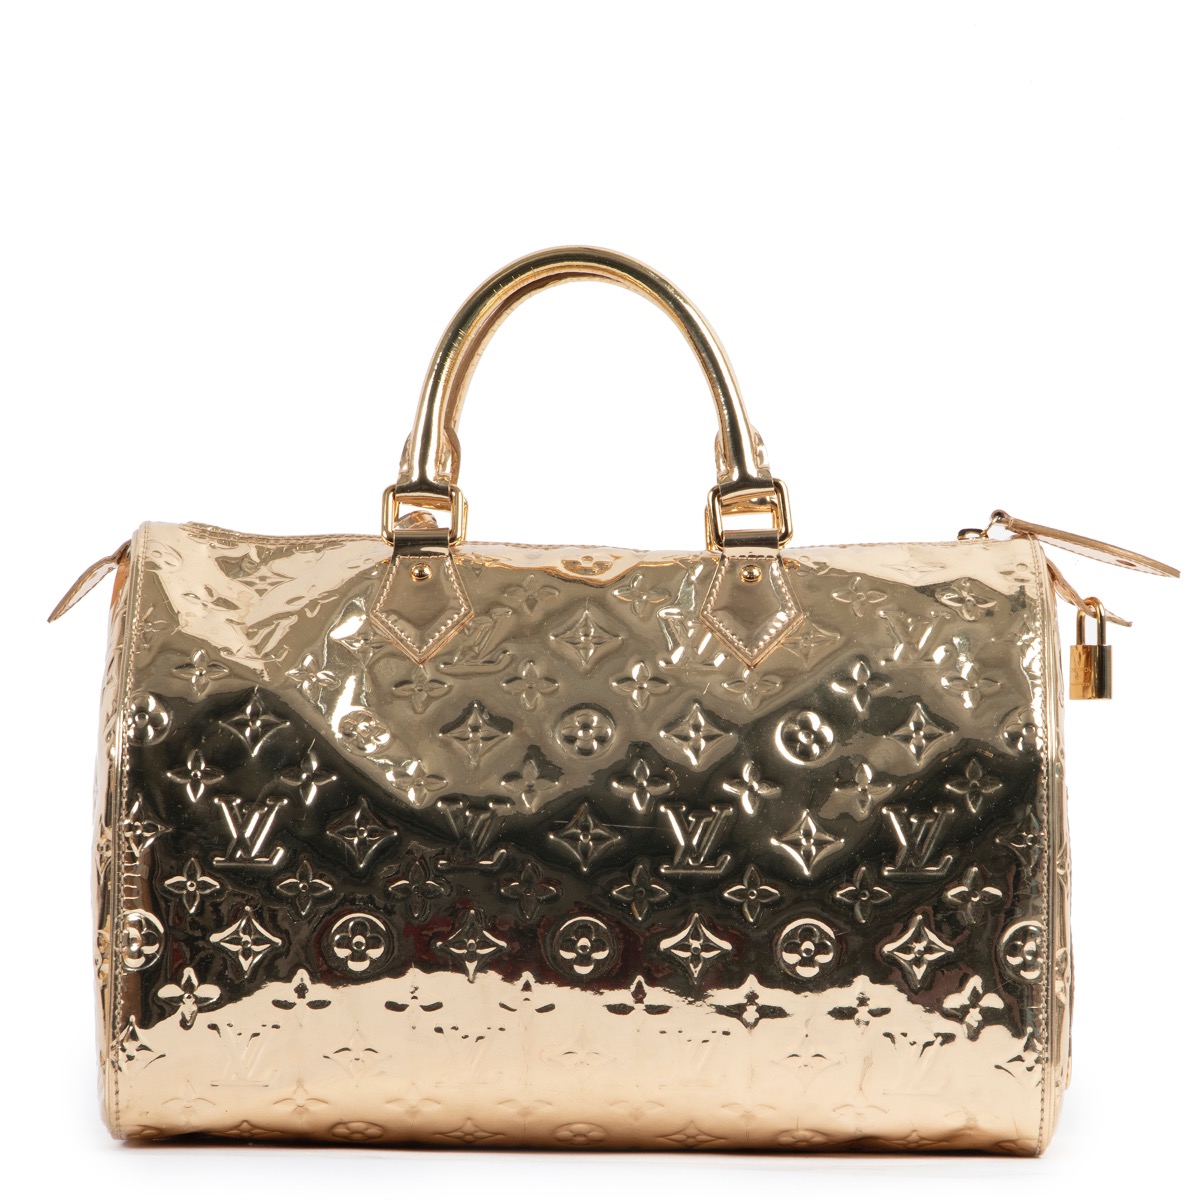 Fmtexclusive - LOUIS VUITTON LV Golden Plated Stainless Steel